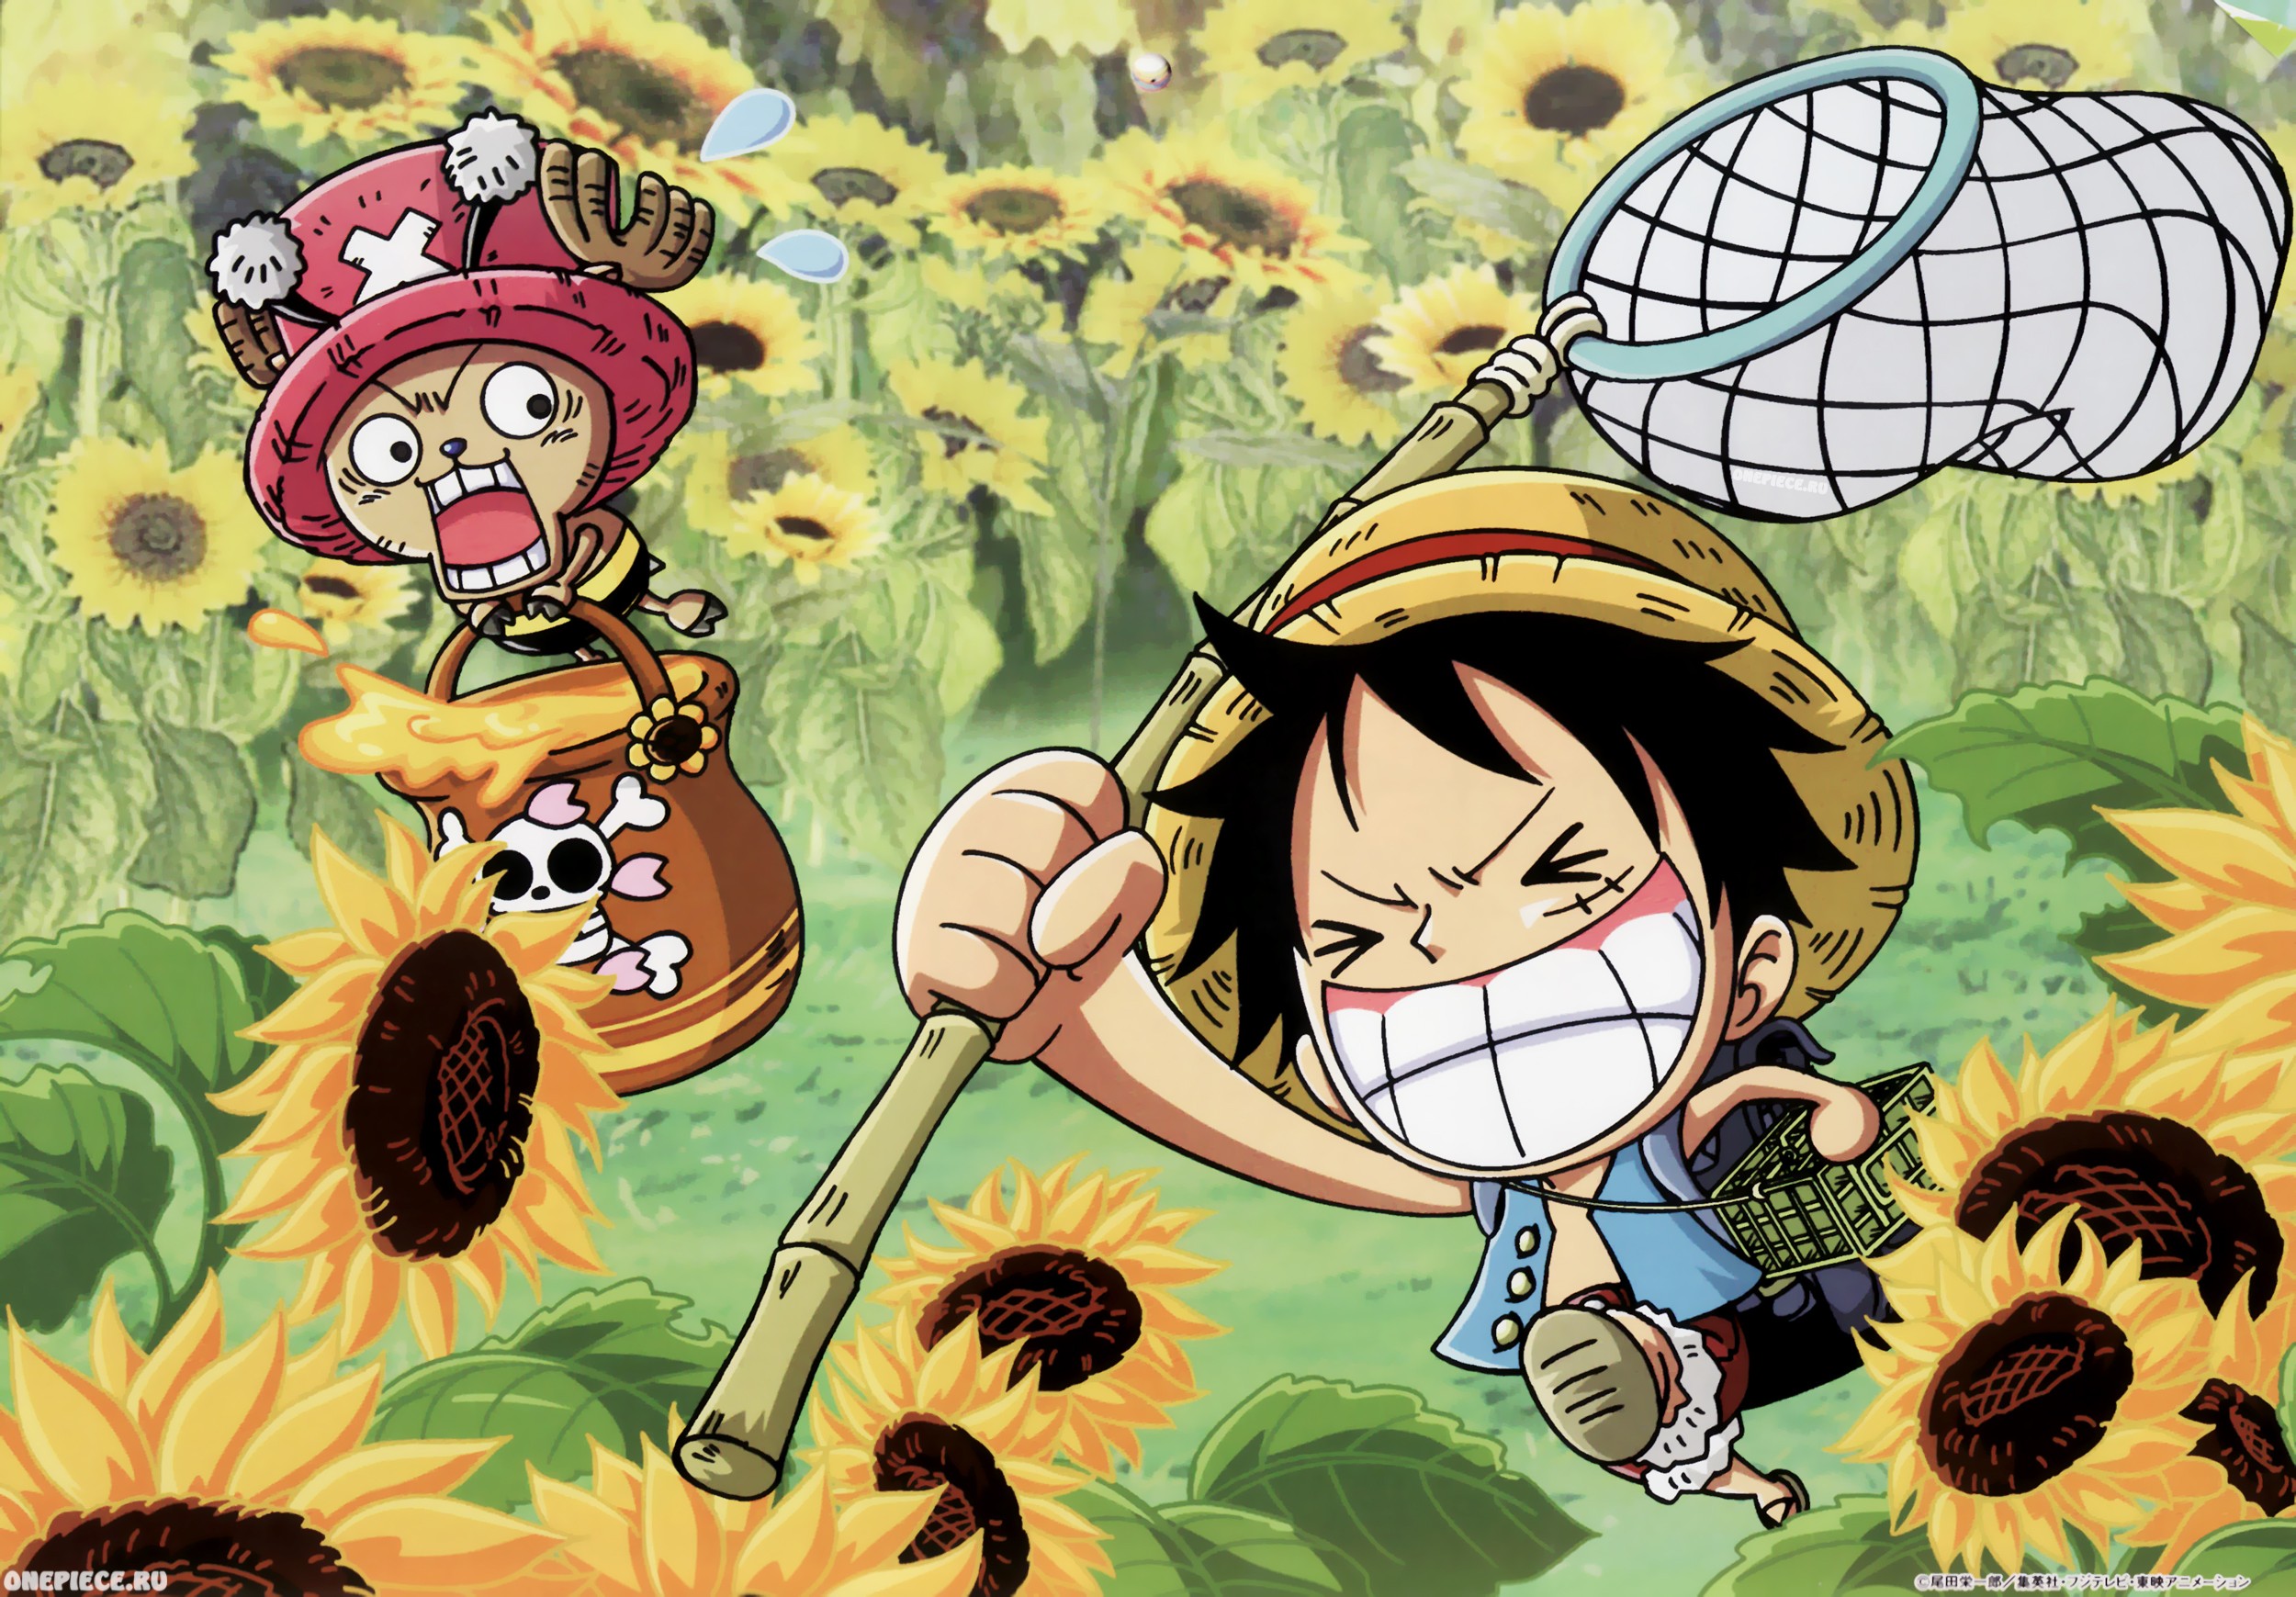 One Piece 1366x768 Wallpapers - Wallpaper Cave